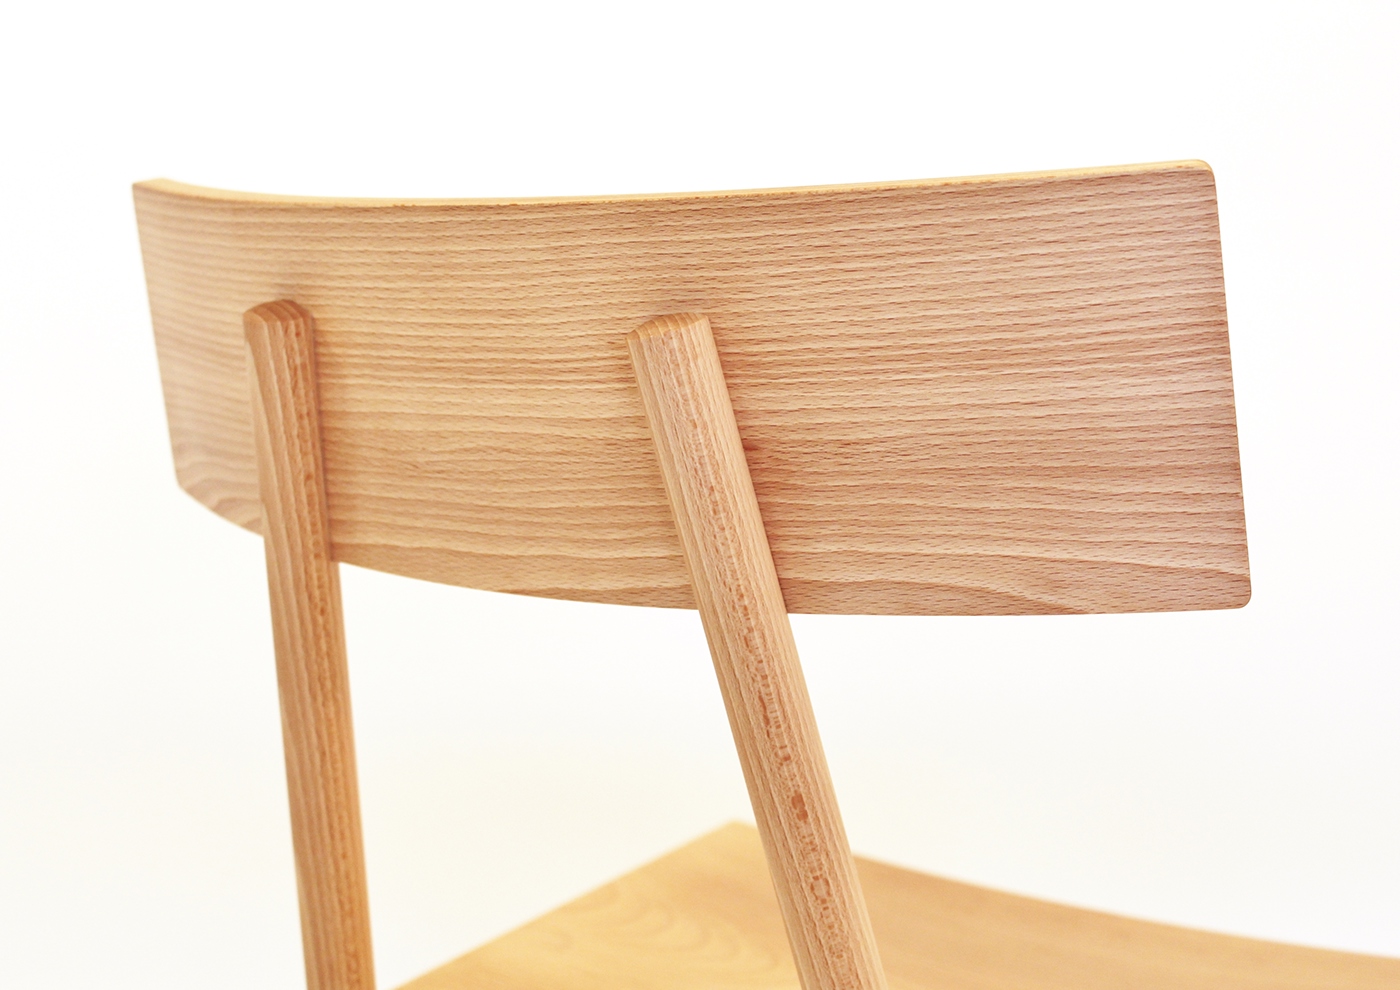 woodworking furniture design Beech chair chairmaking